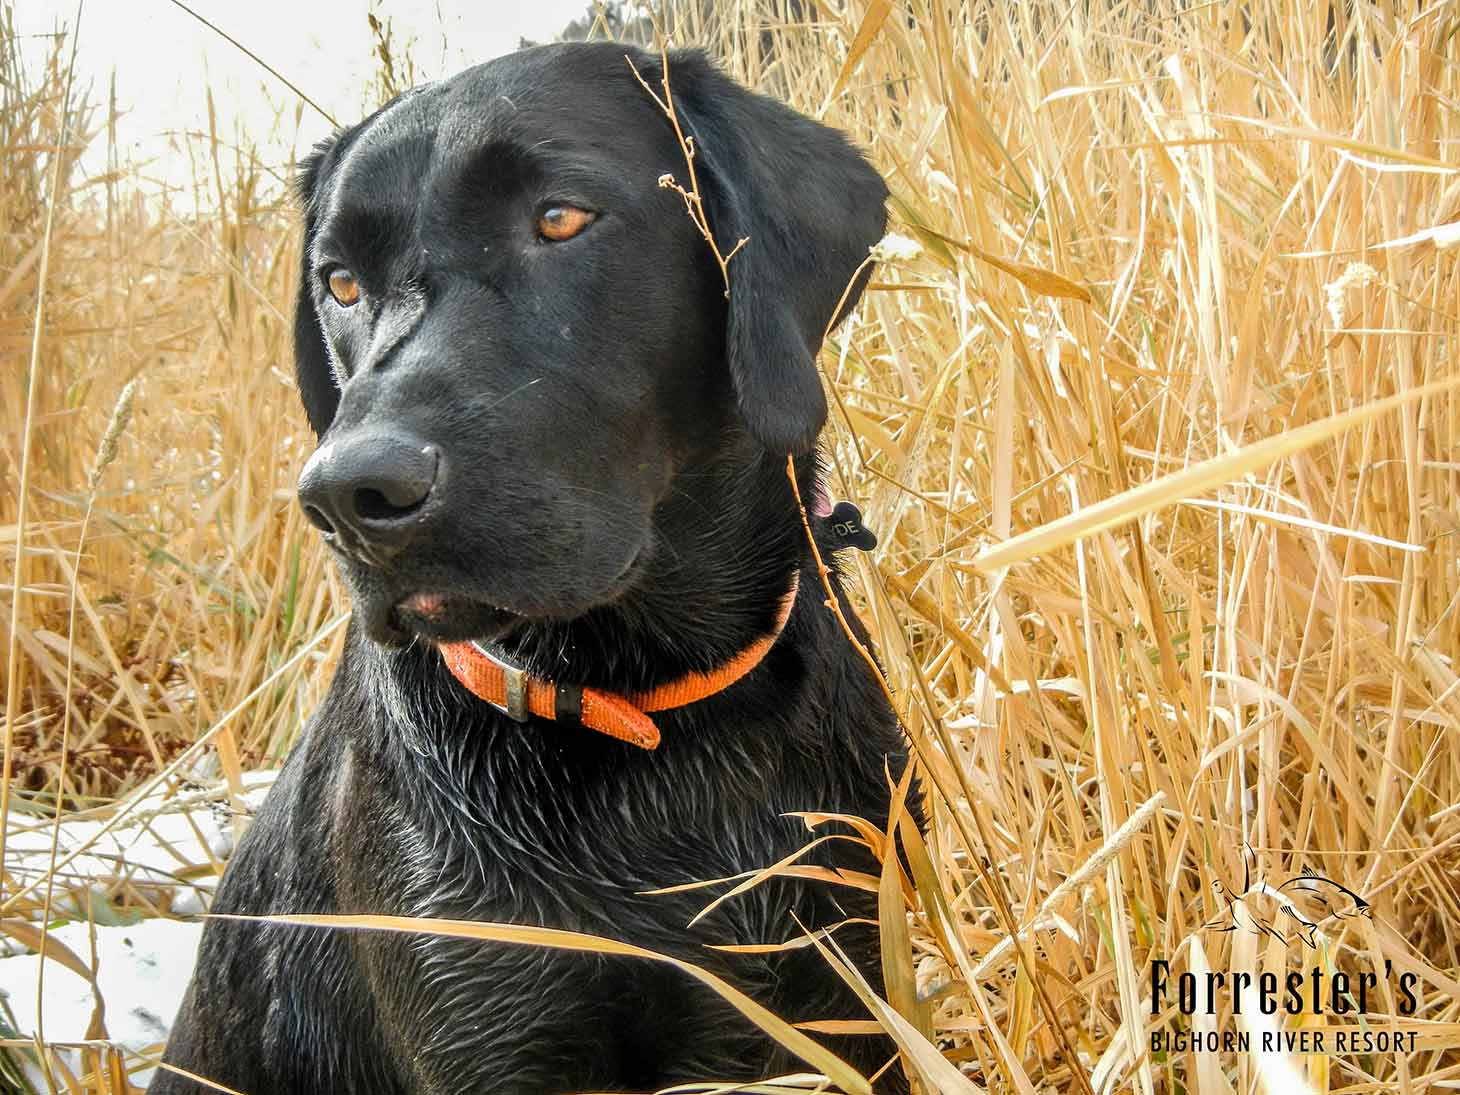 waterfowl hunting, Big Horn River, Duck dogs, black labs, Forrester's Bighorn River Resort, duck hunting